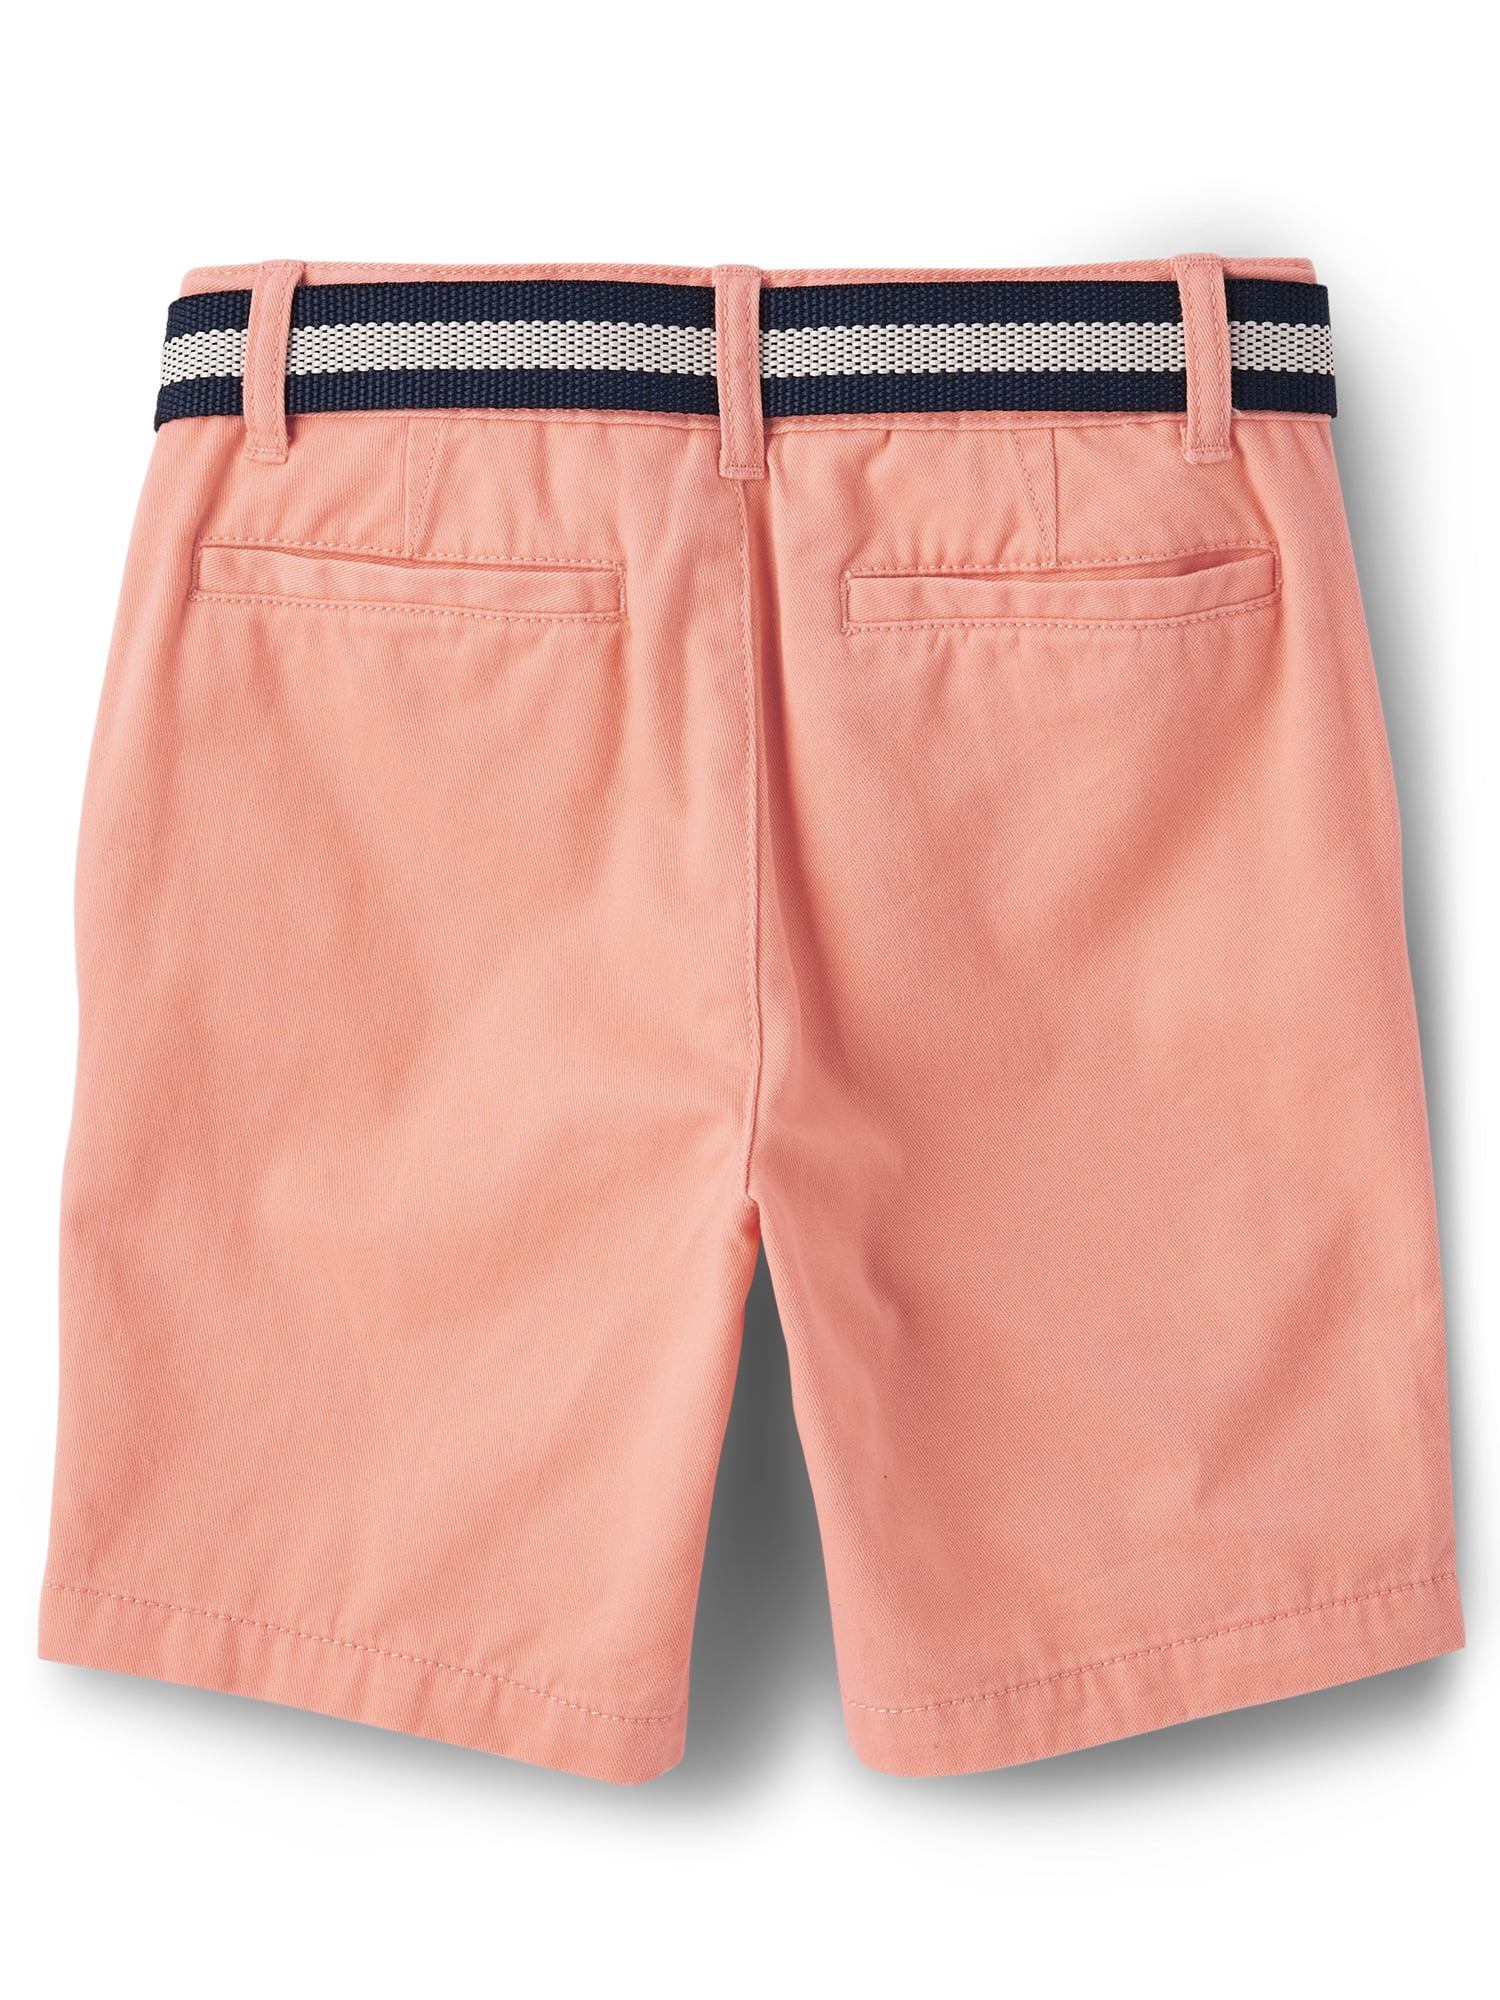 The Children's Place Boy's Belted Chino Shorts, Sizes 4-16 